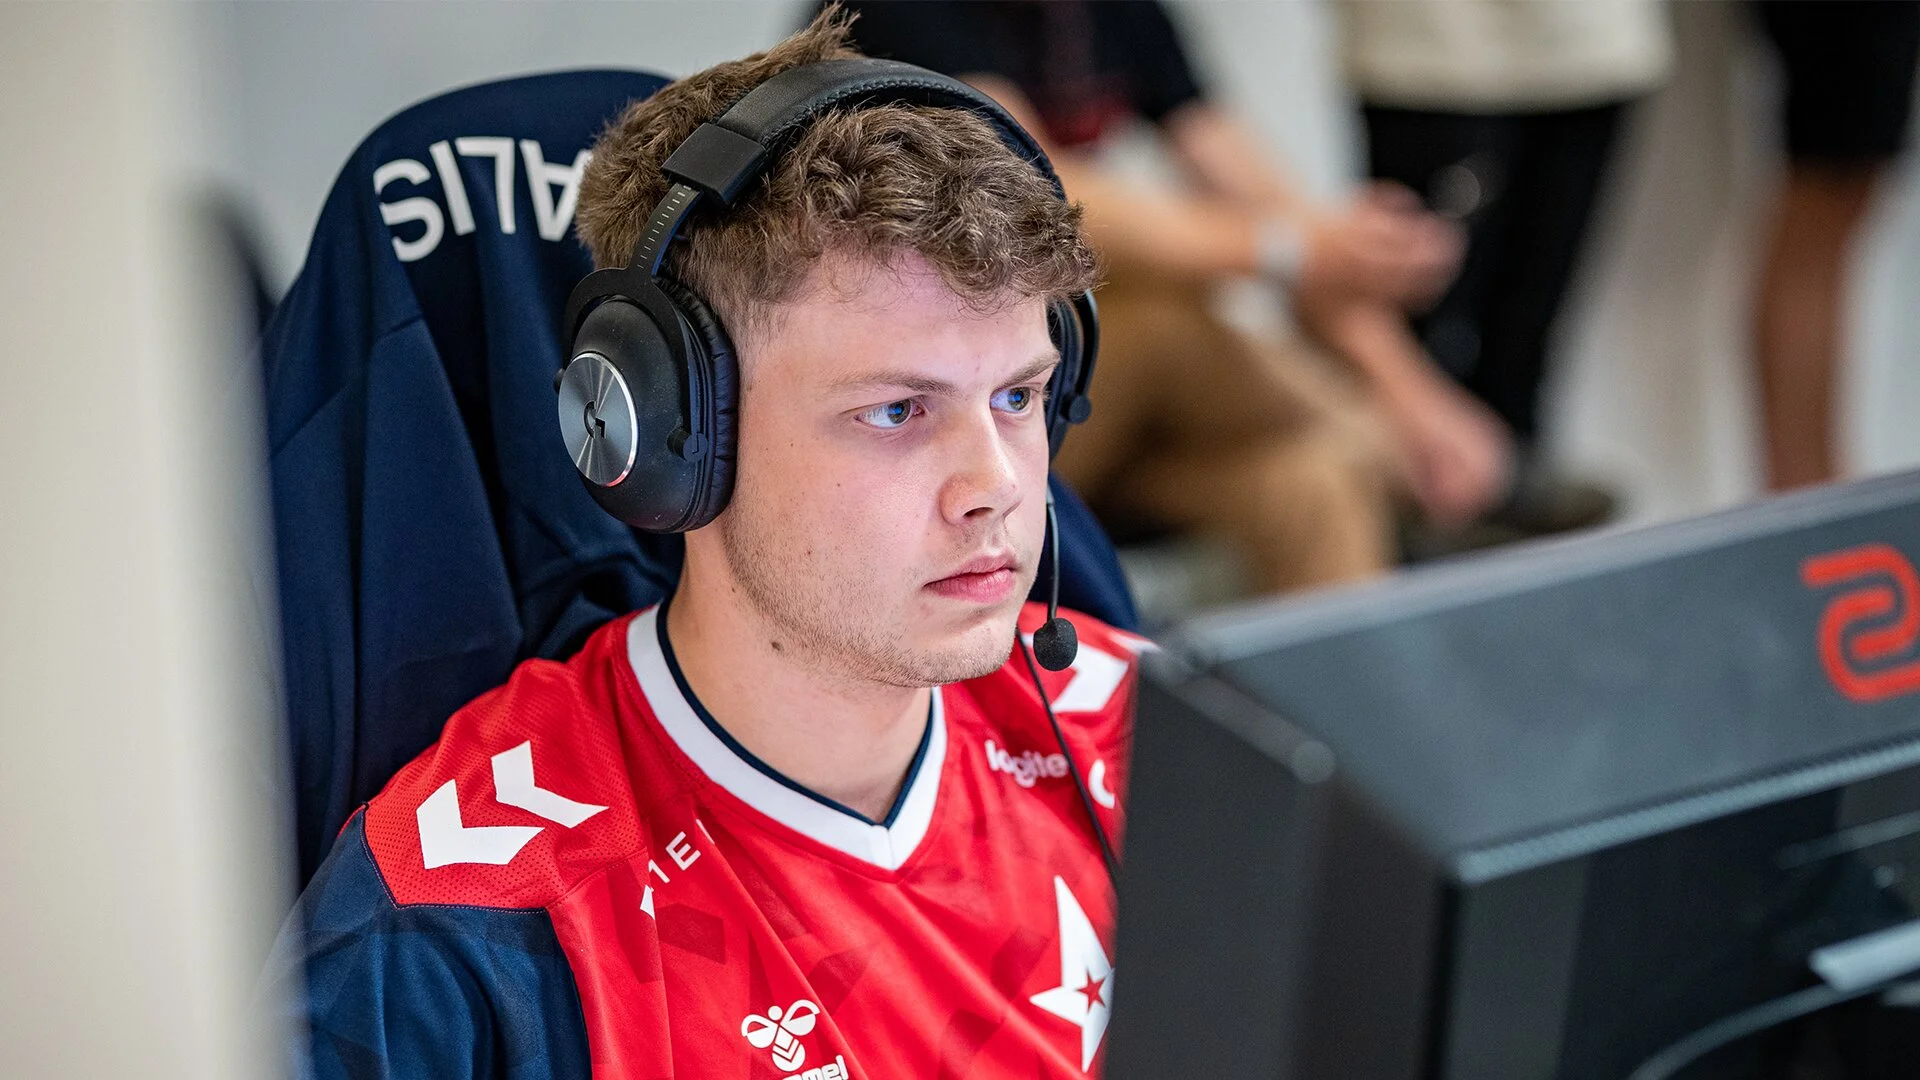 br0 signs with Astralis